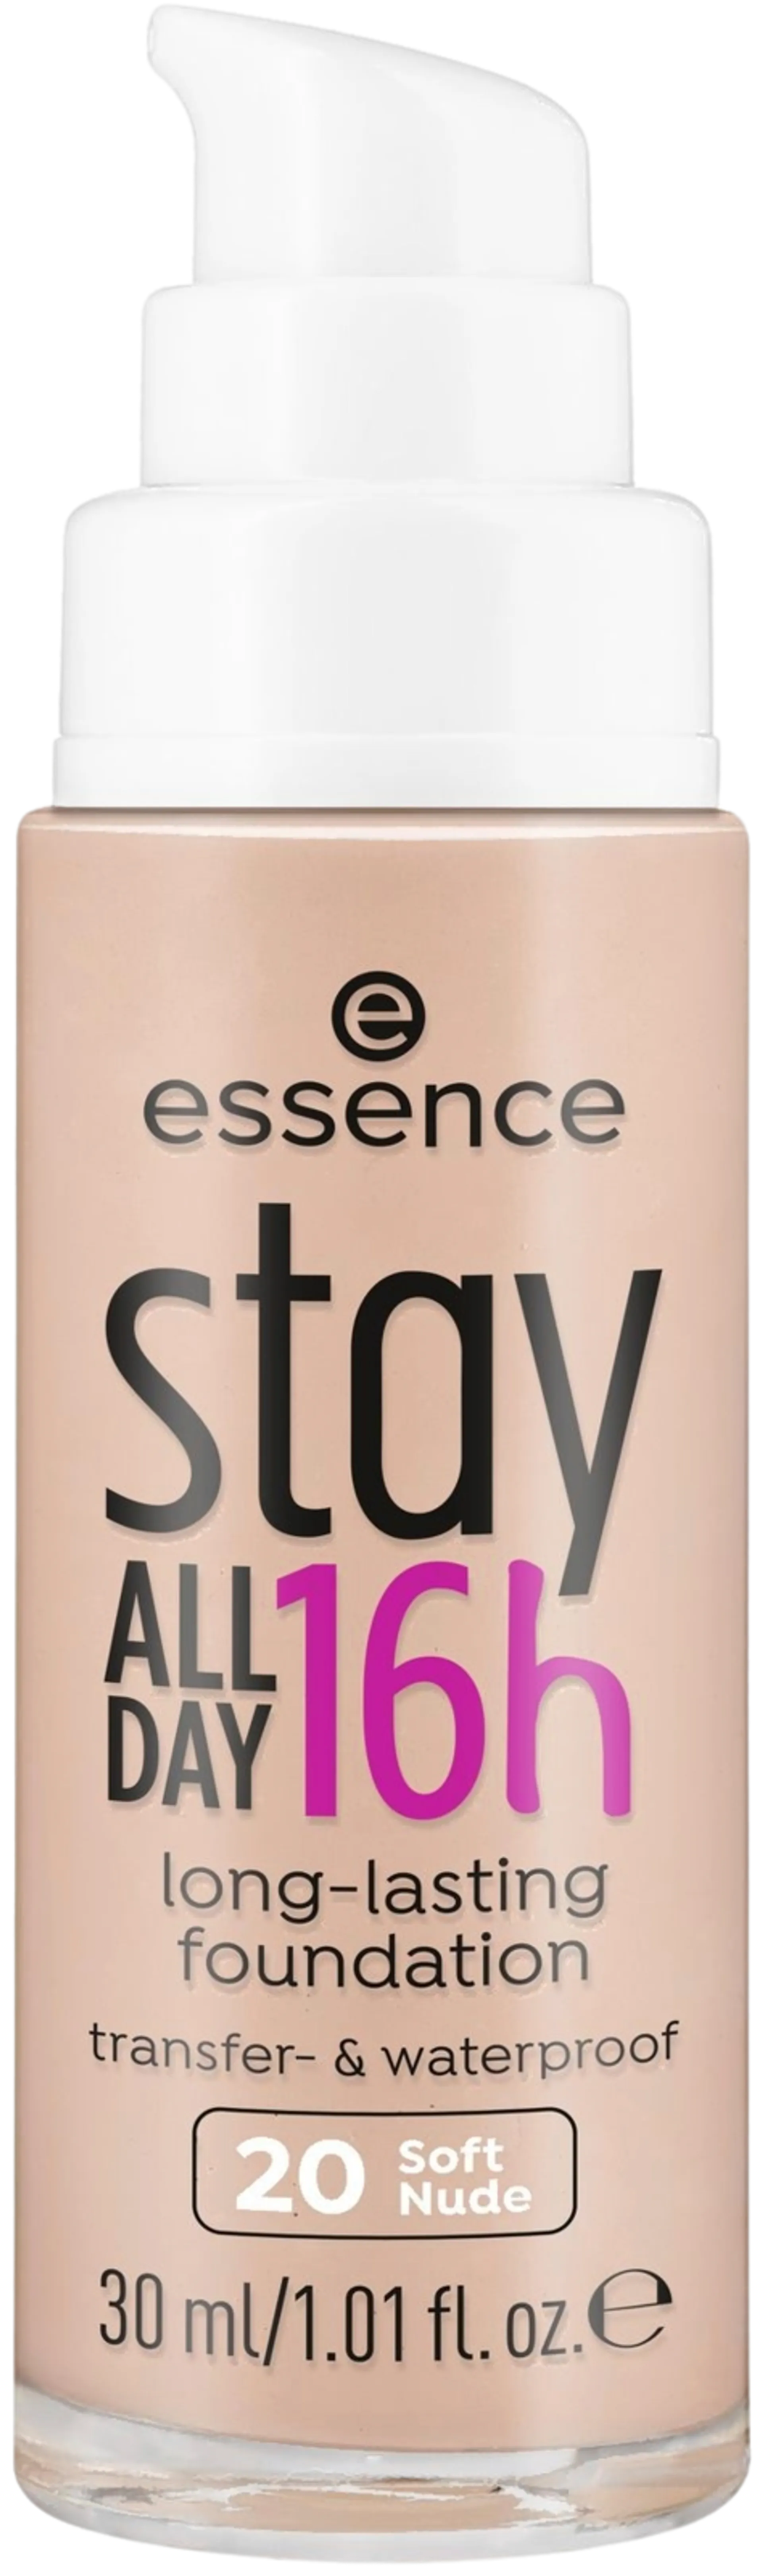 essence stay ALL DAY 16h long-lasting meikkivoide 30 ml - Soft Nude - 1